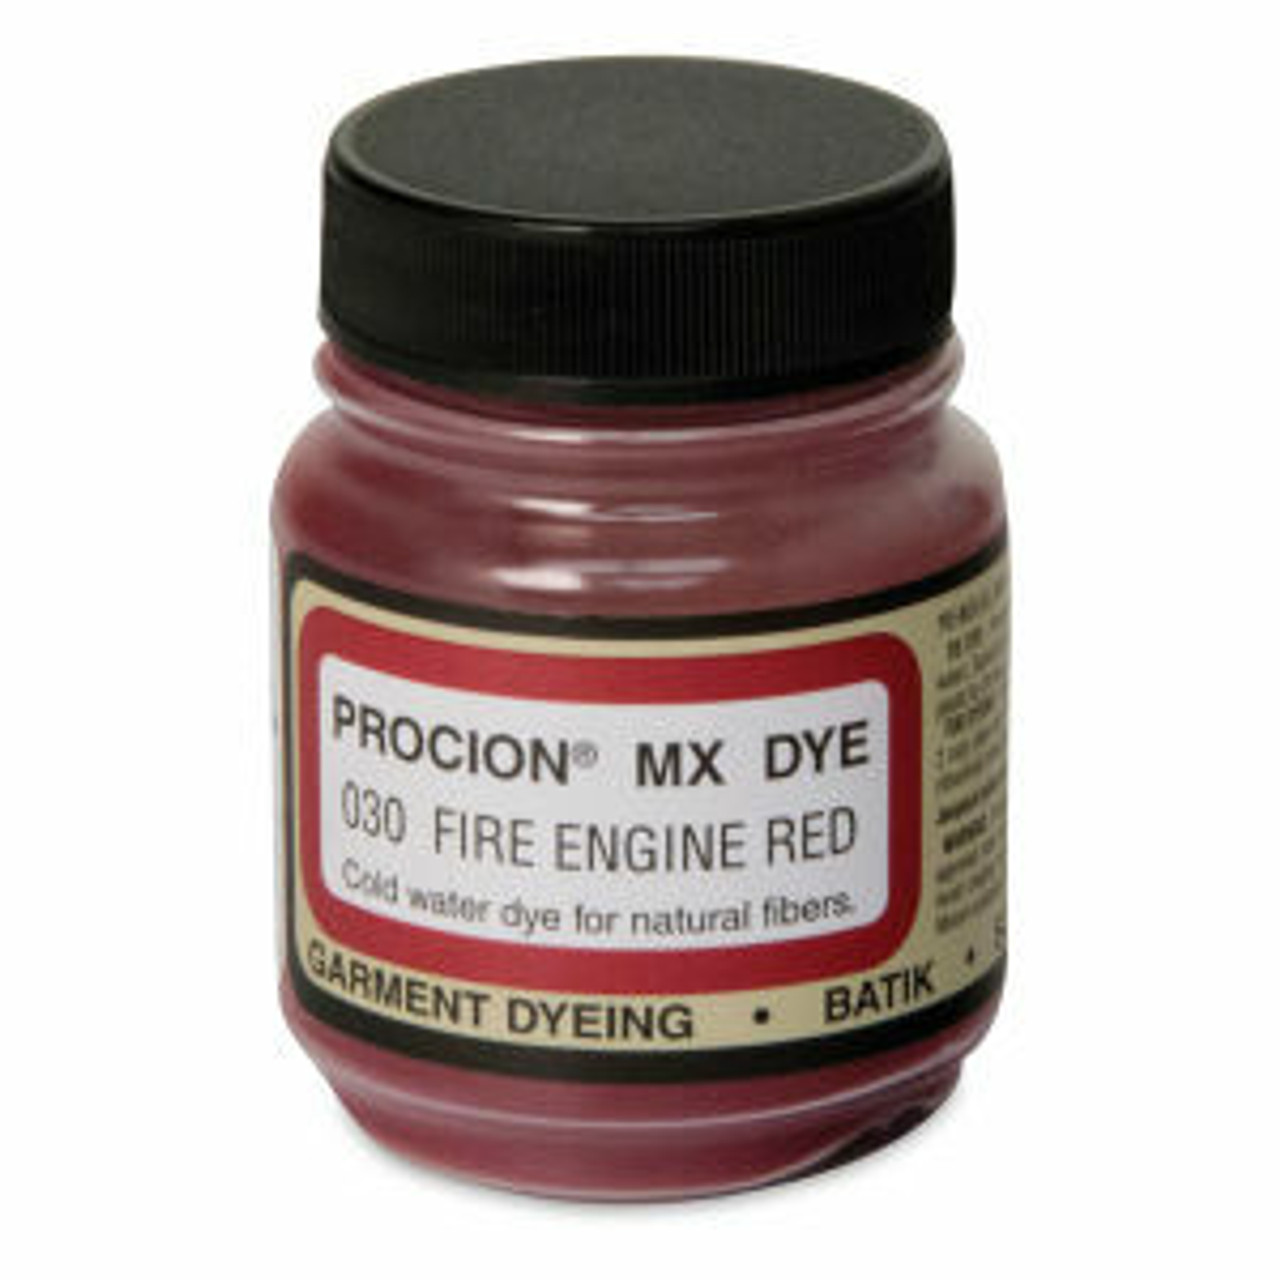  Jacquard Products Acid Dye, Fire Red